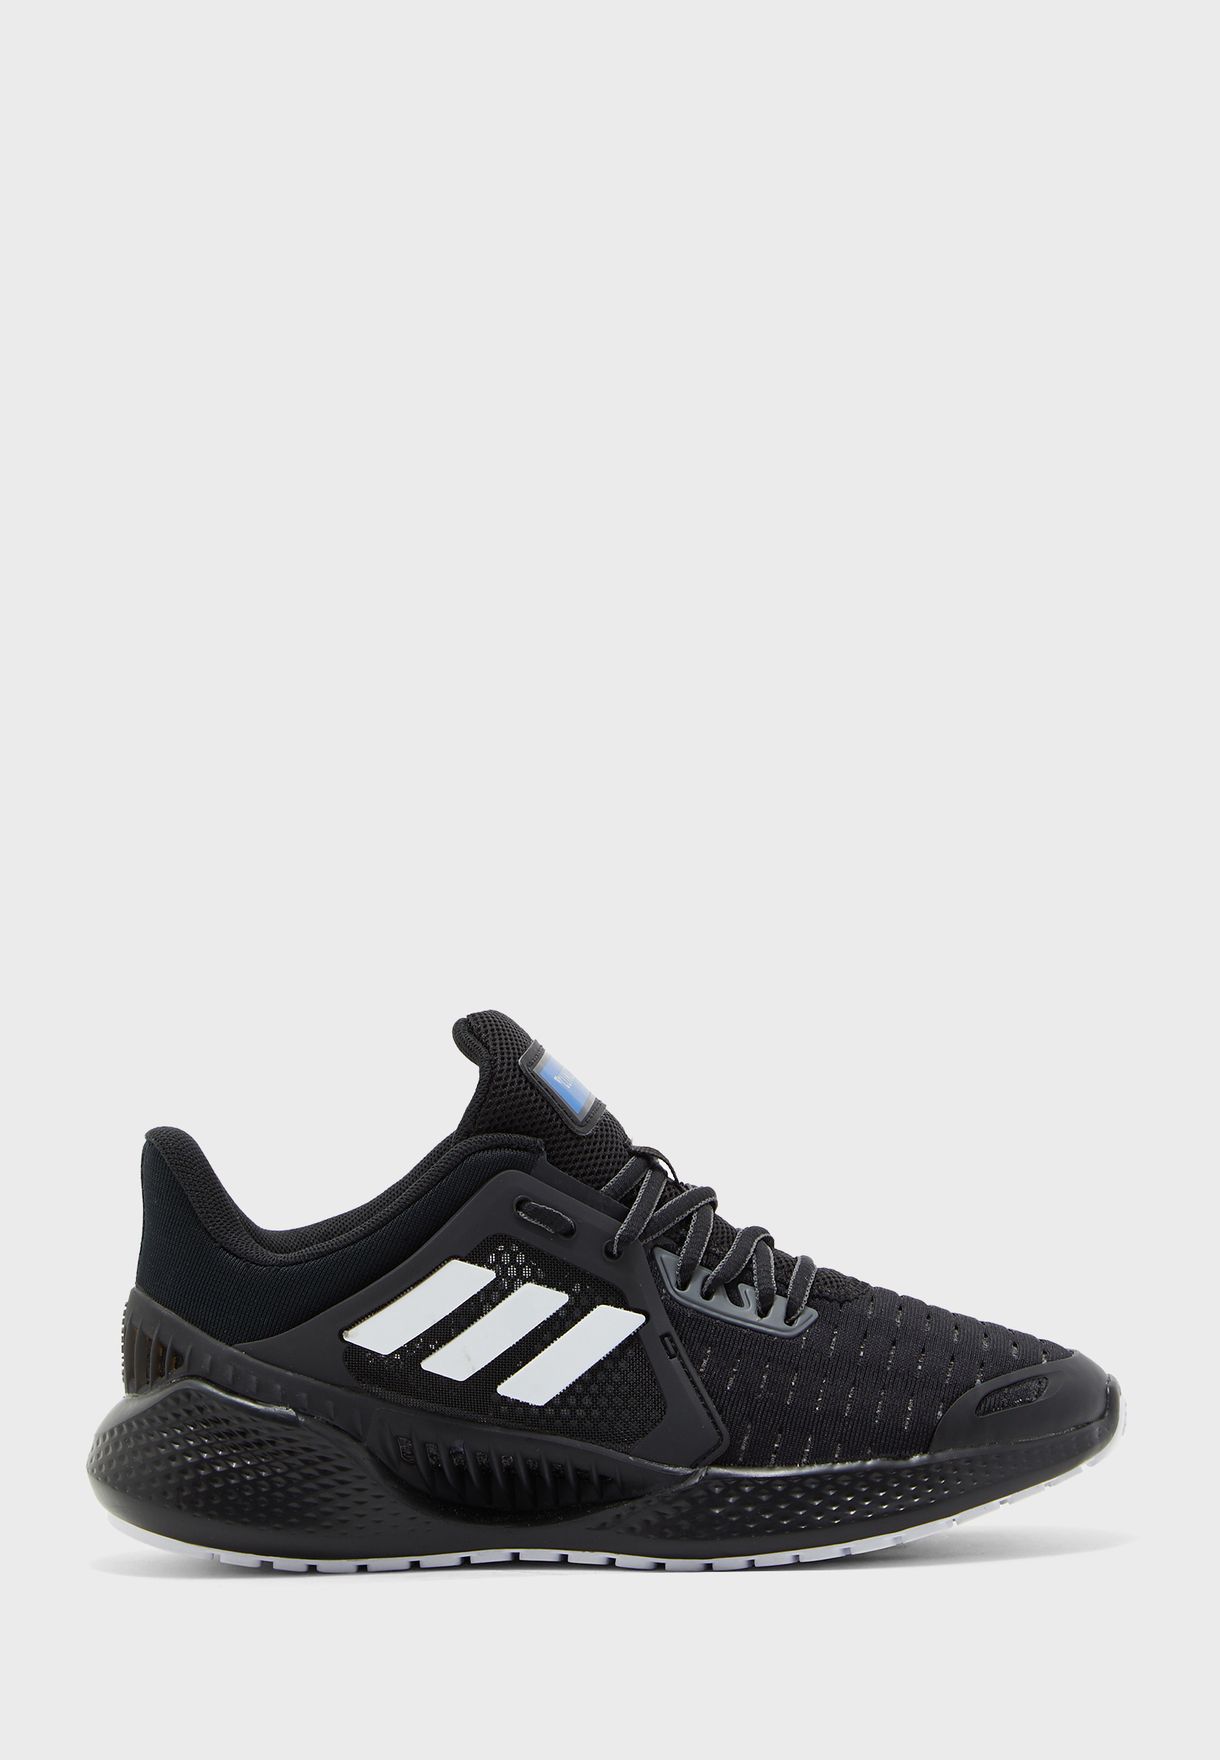 adidas climacool youth shoes